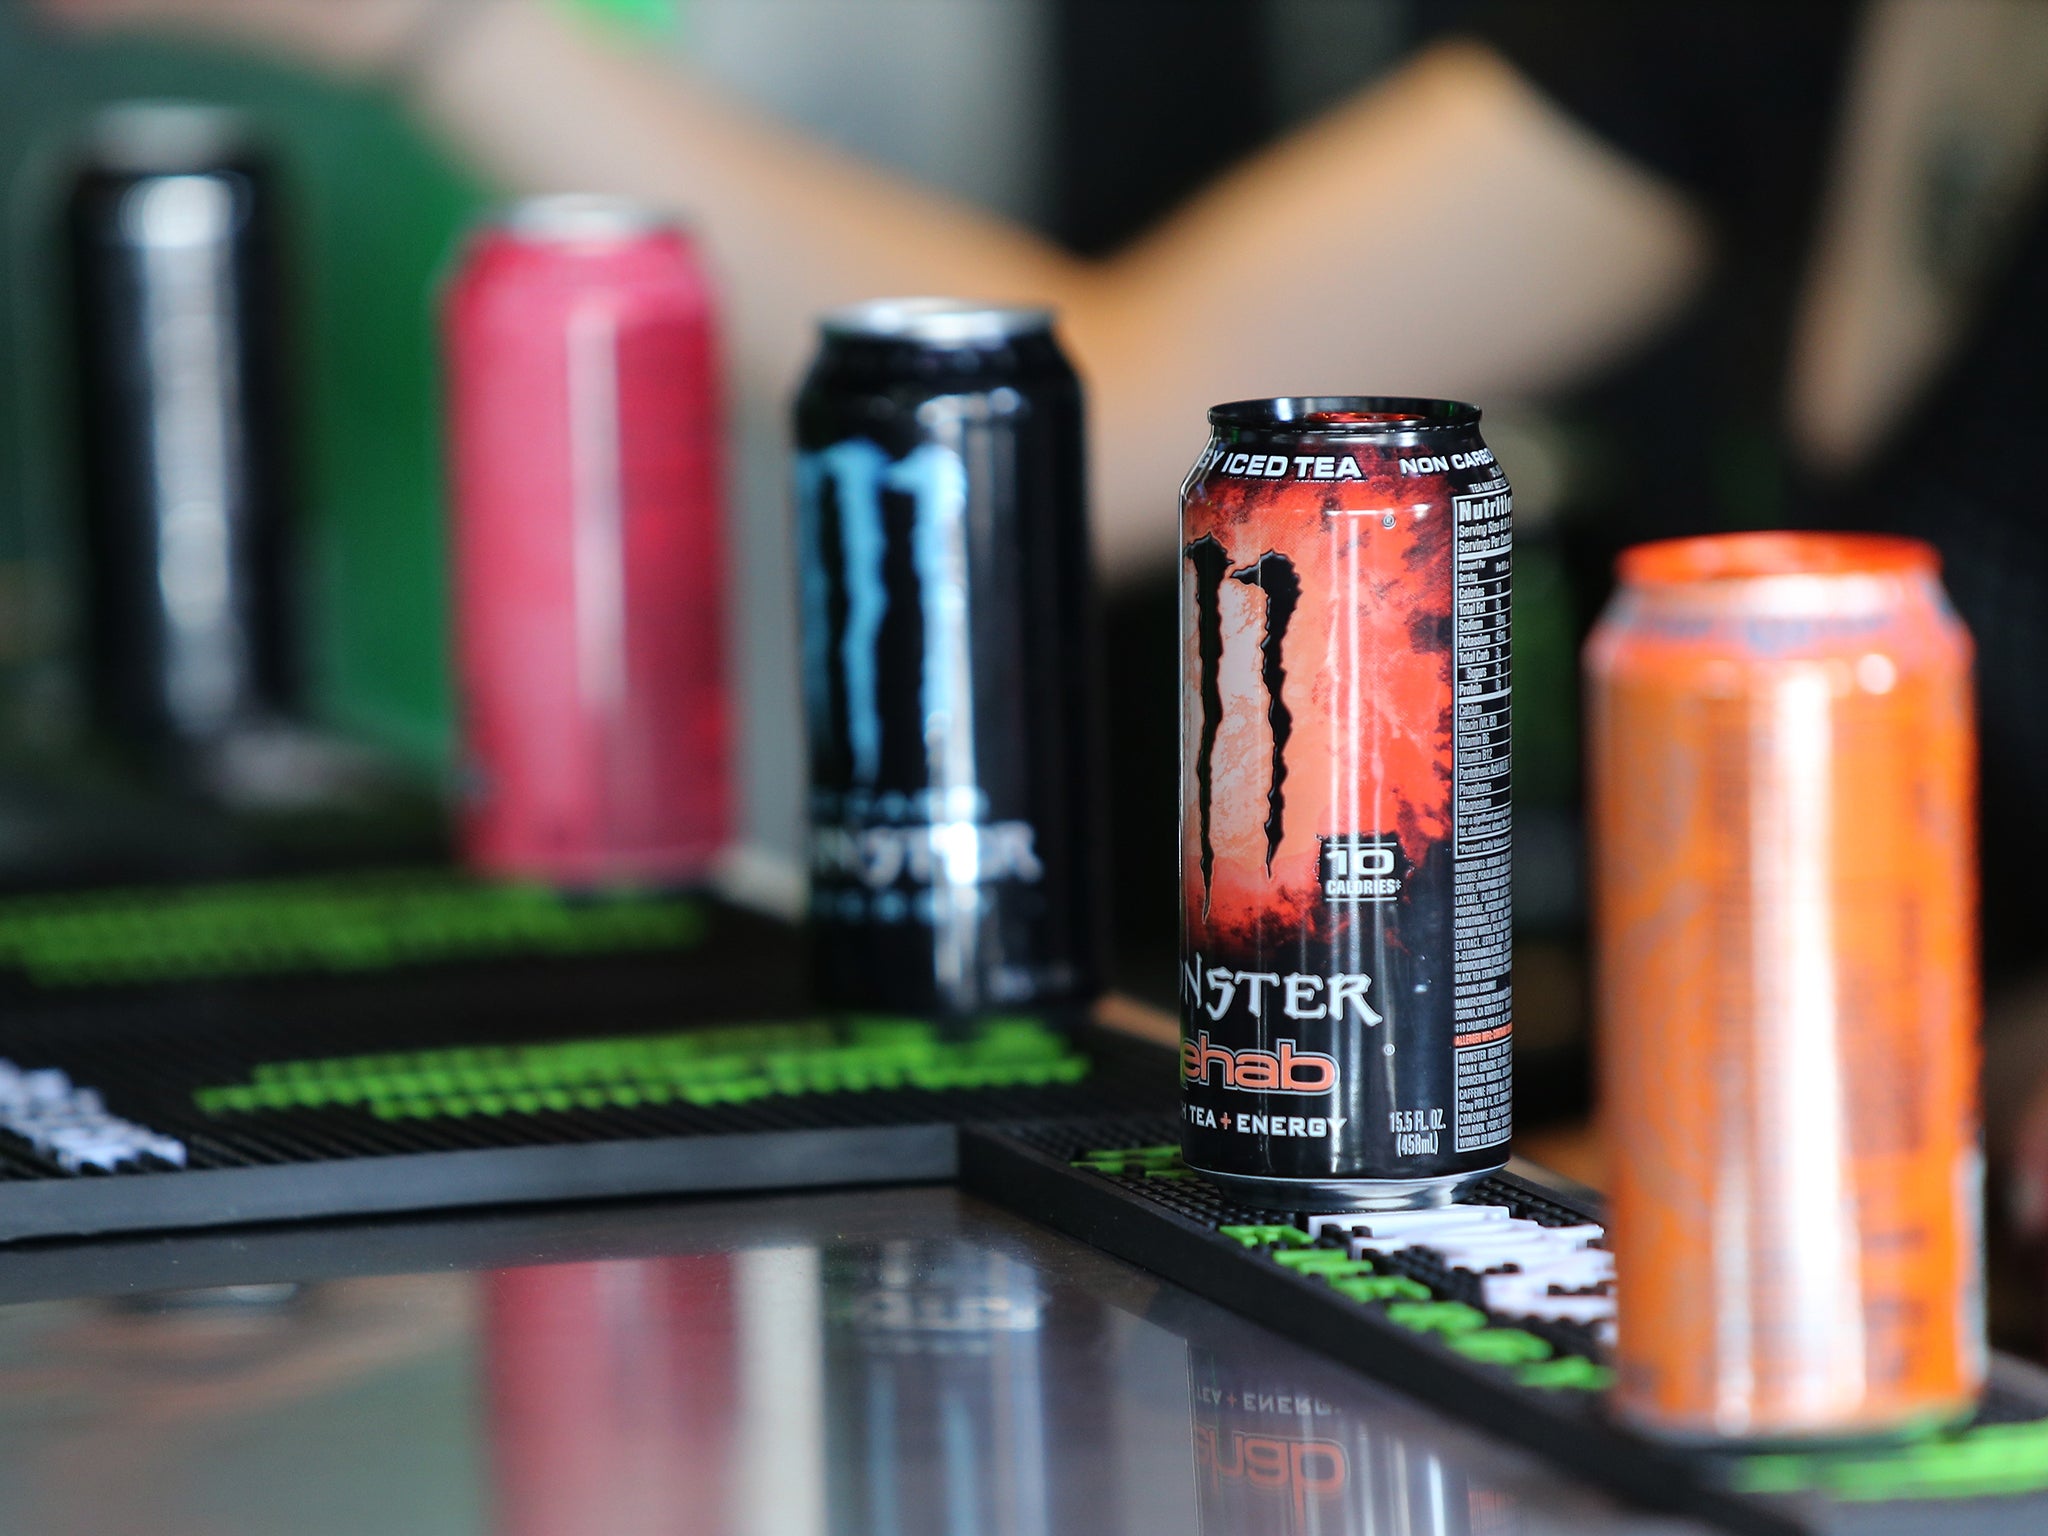 Some energy drinks contain exceptionally high levels of sugar, with on average 60 per cent more calories and 65 per cent more sugar than other regular soft drinks